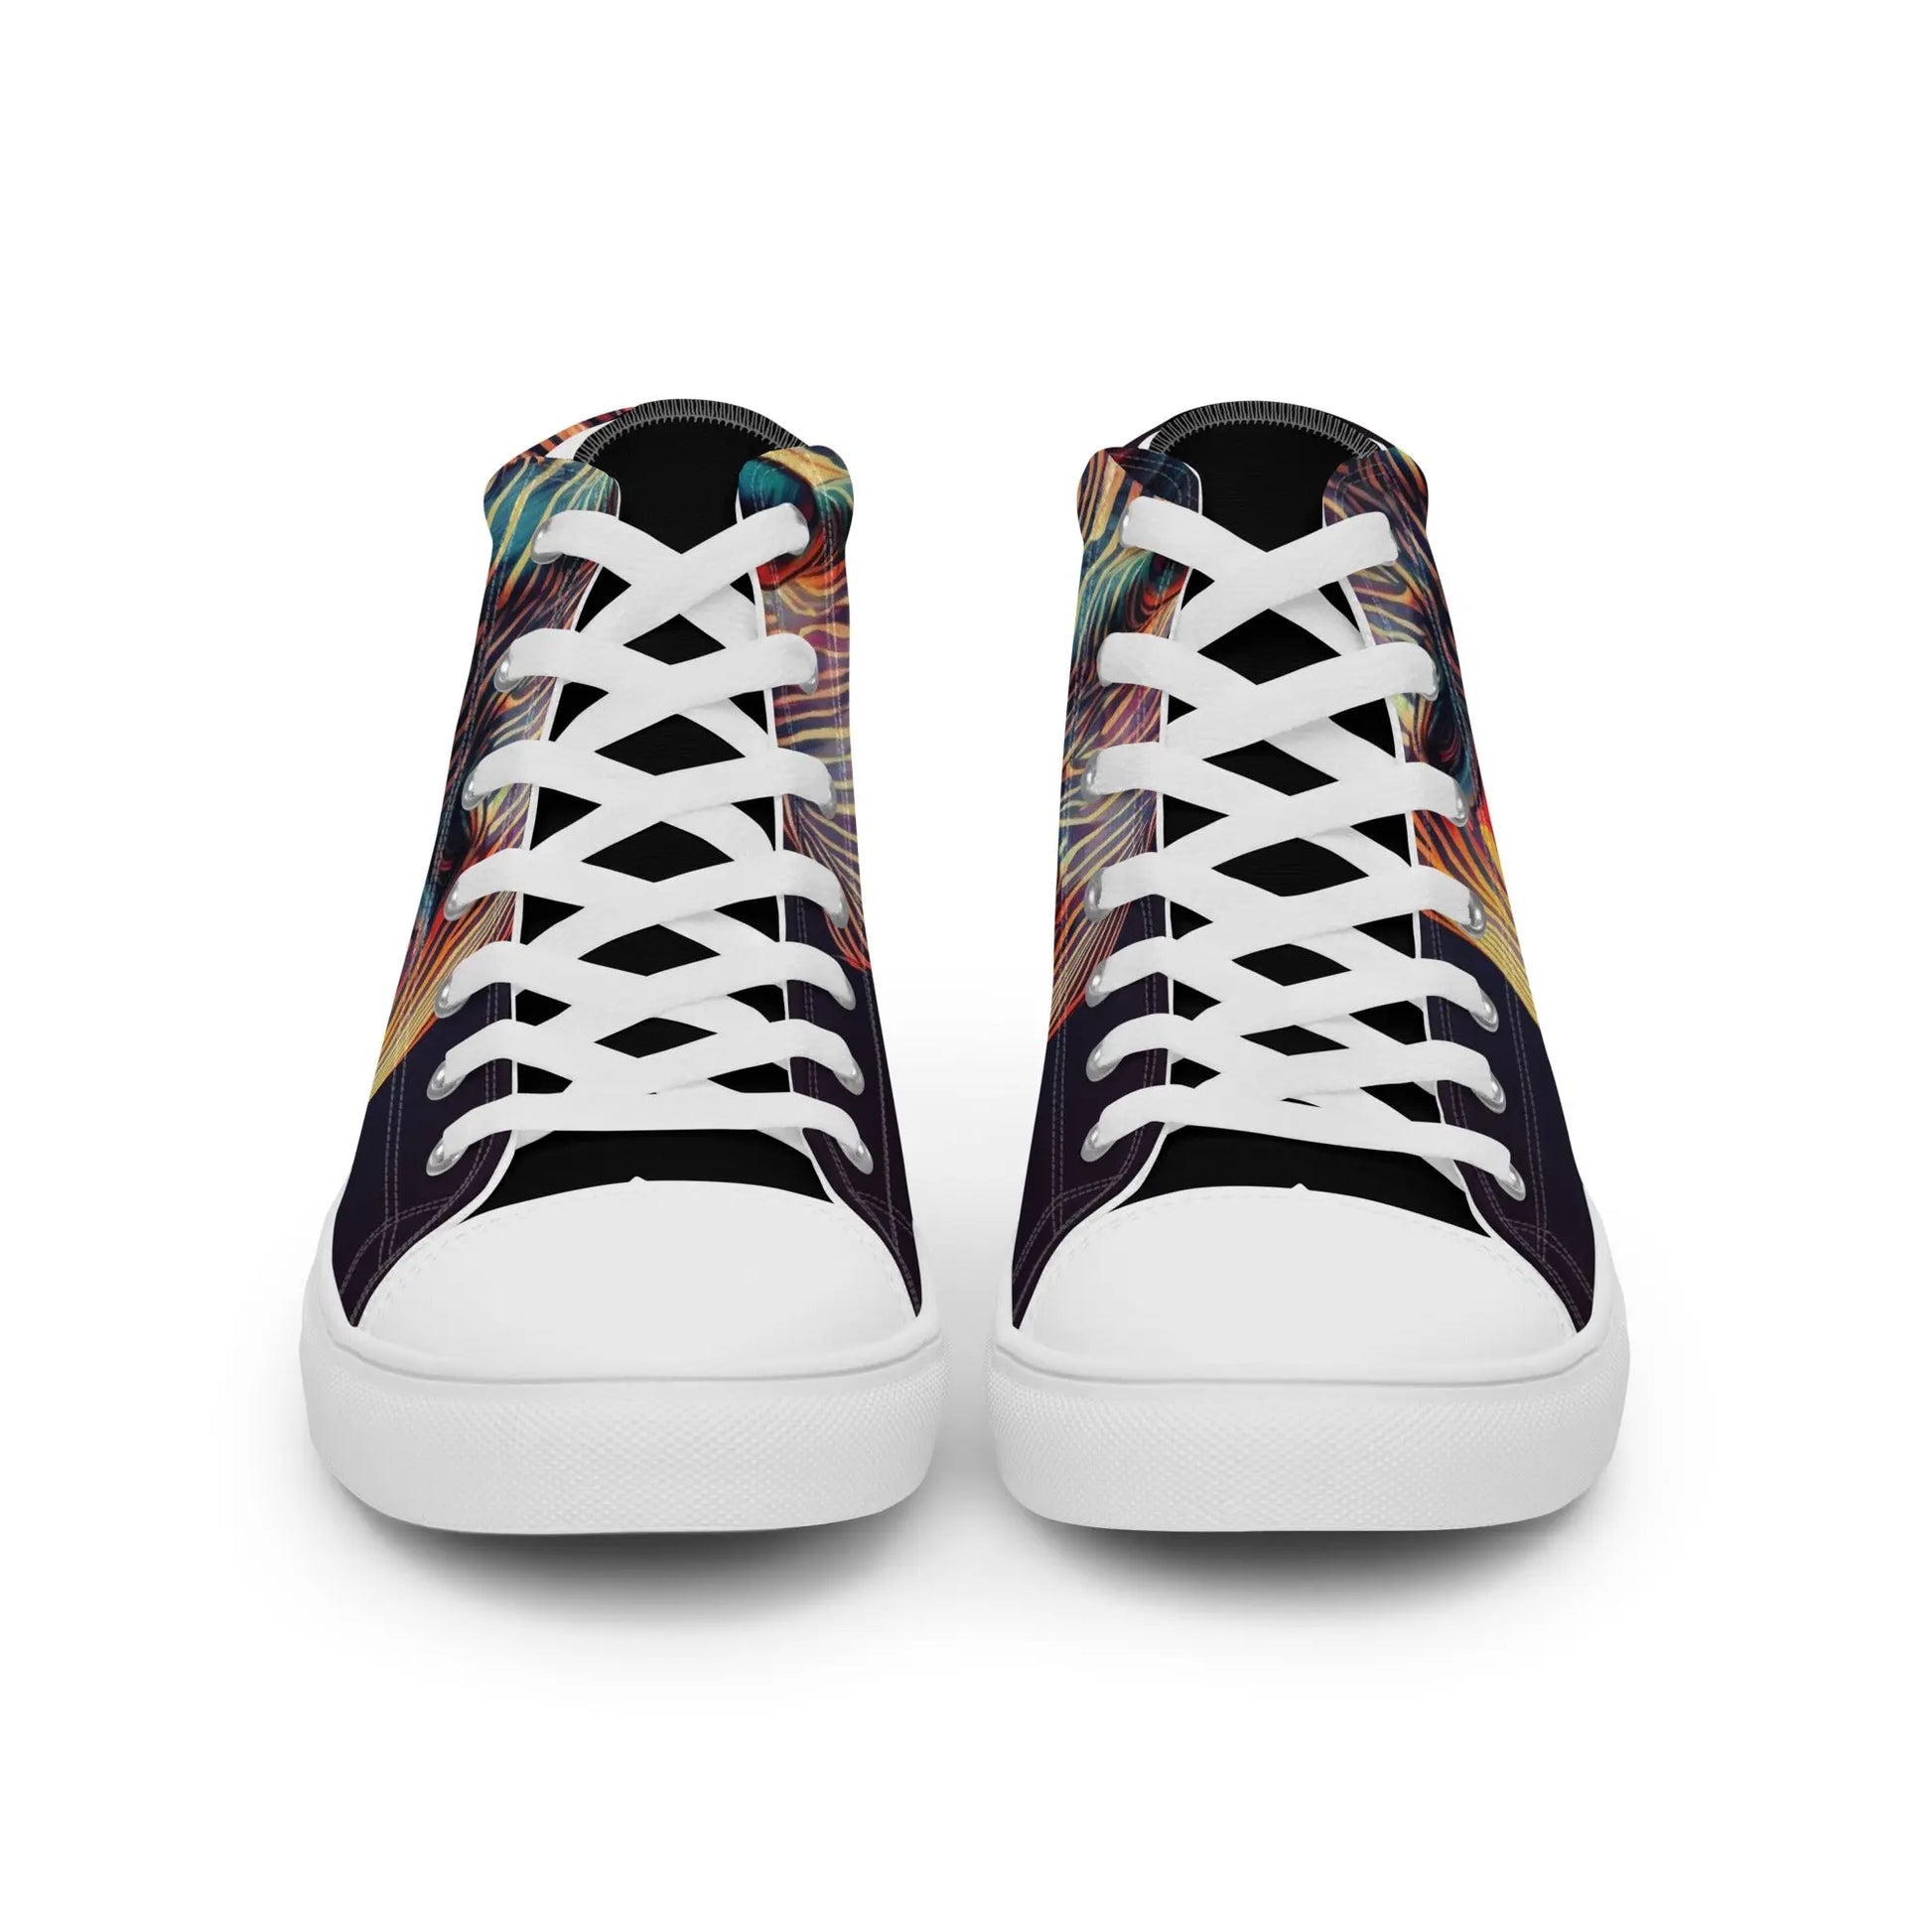 Fauvism Kinetic Zebra High Top Sneakers: AI-Engineered, Unleash Your Wild Side with Unisex, Animal Print, Durable, Comfortable, Art-Inspired Footwear Kinetic Footwear